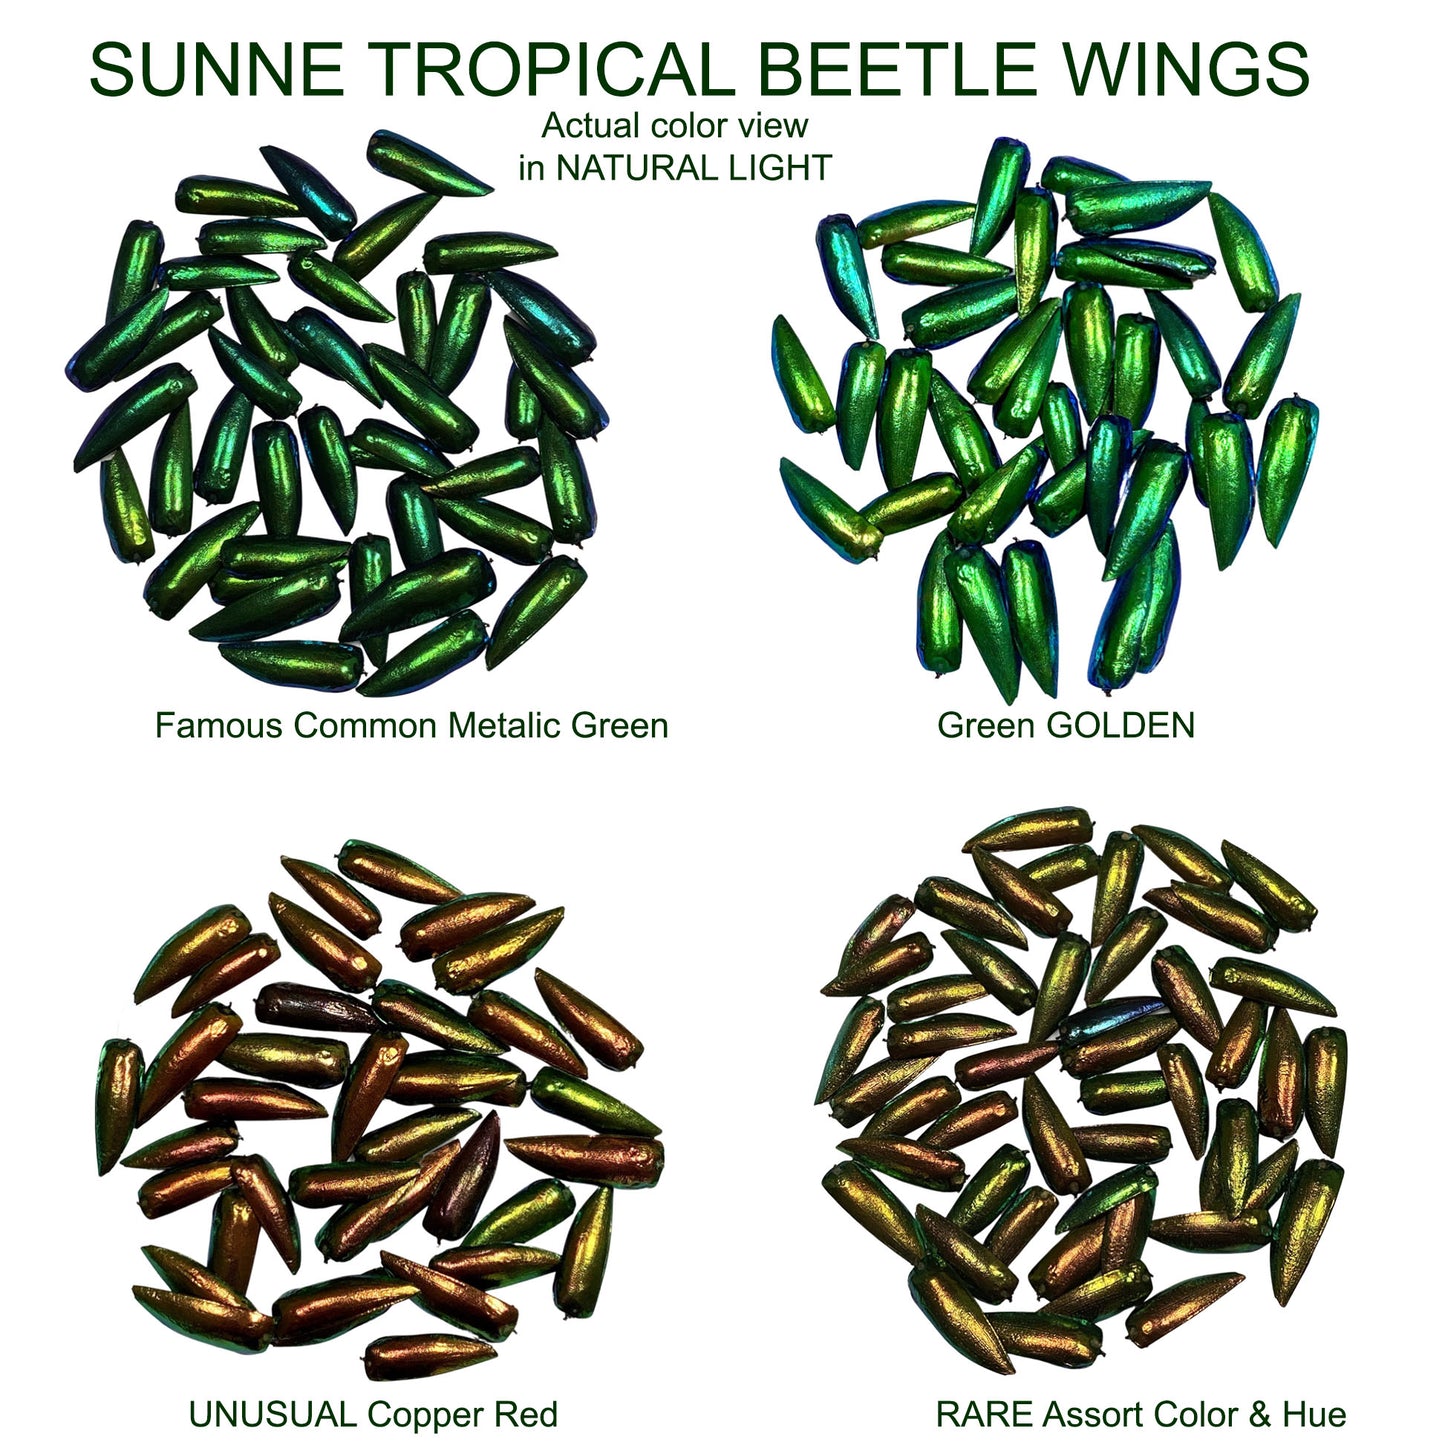 Jewel Beetles Wings UNDRILLED NO-HOLE 100 Pcs Natural Wings - Special RARE Color